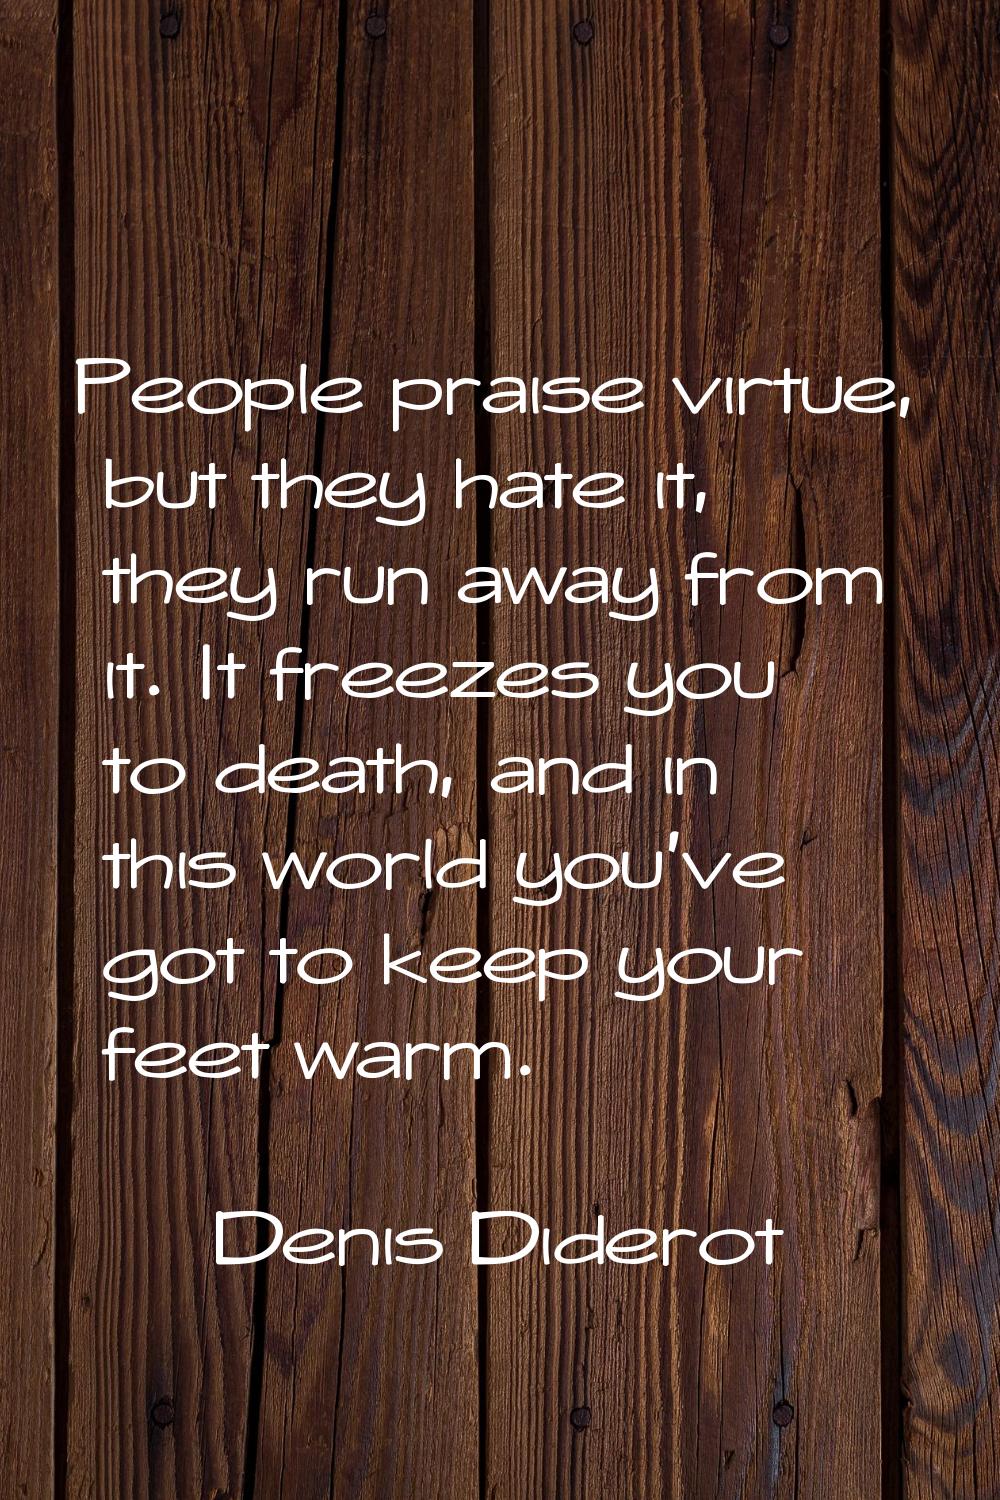 People praise virtue, but they hate it, they run away from it. It freezes you to death, and in this